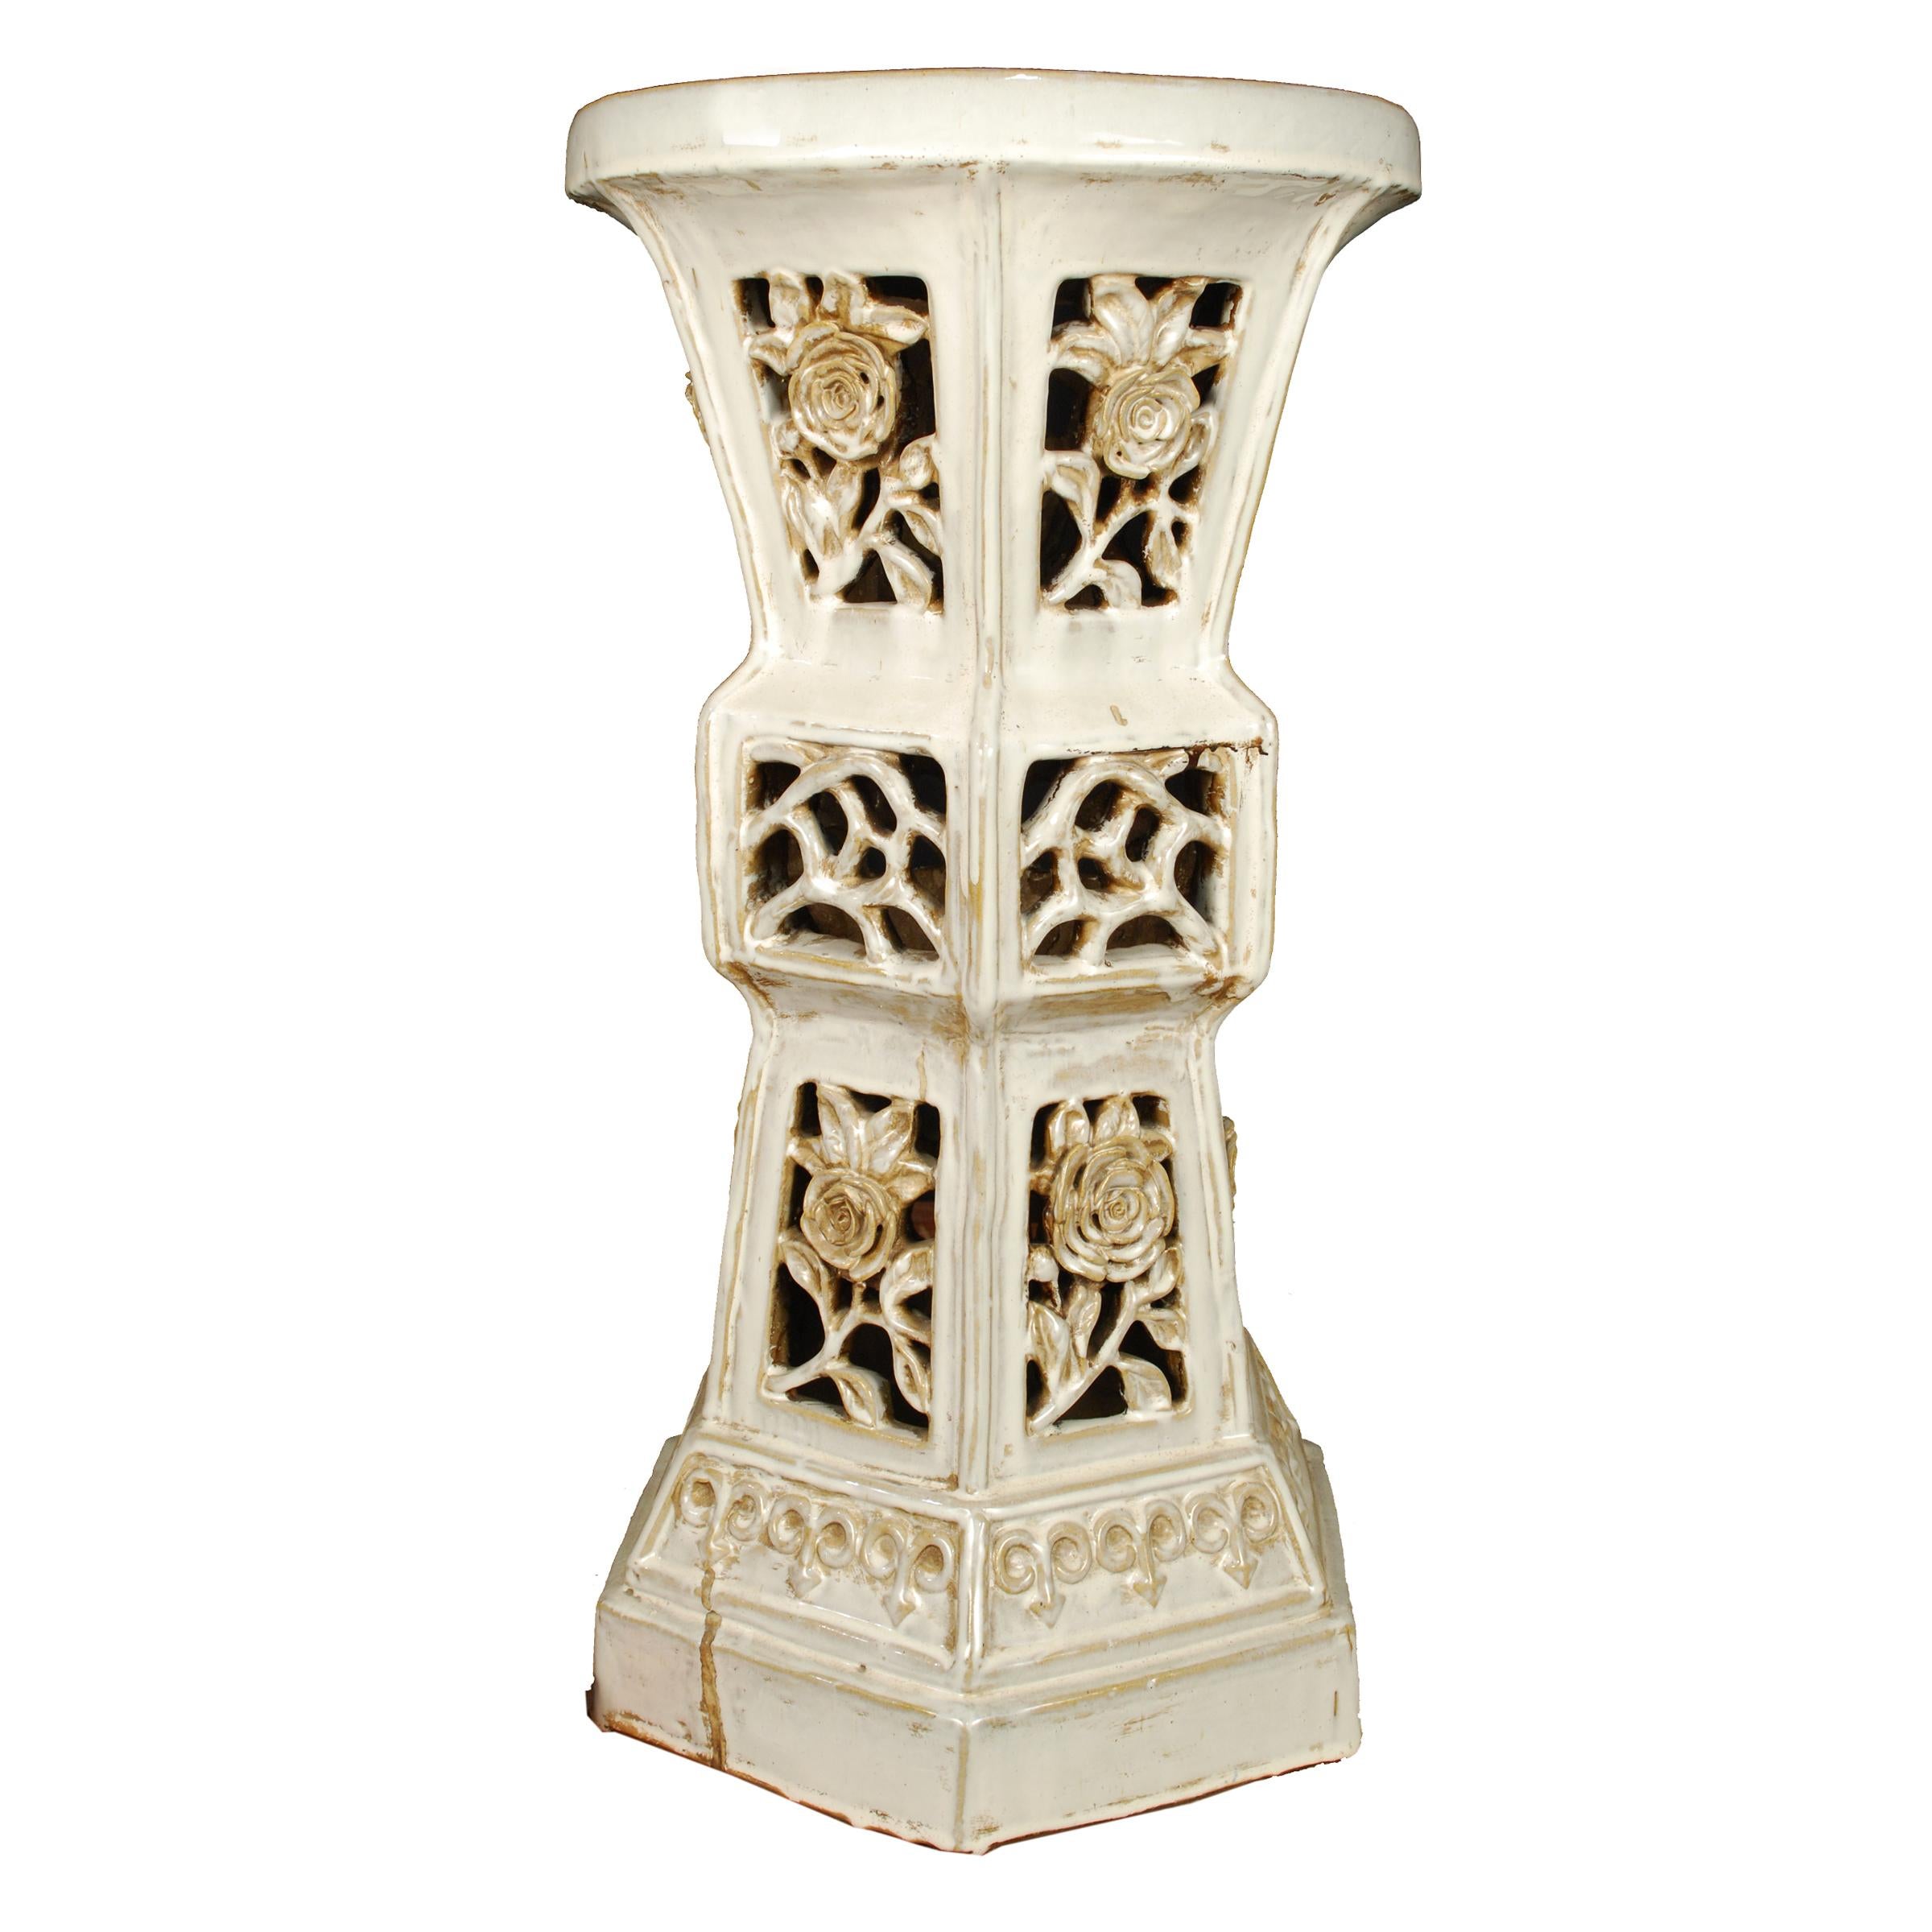 This early 20th century white glazed ceramic pedestal has very unusual form. It was made by an artisan in Southern China and features an hourglass shape and highly dimensional floral cut-outs. It was likely used in a garden for incense, tea or